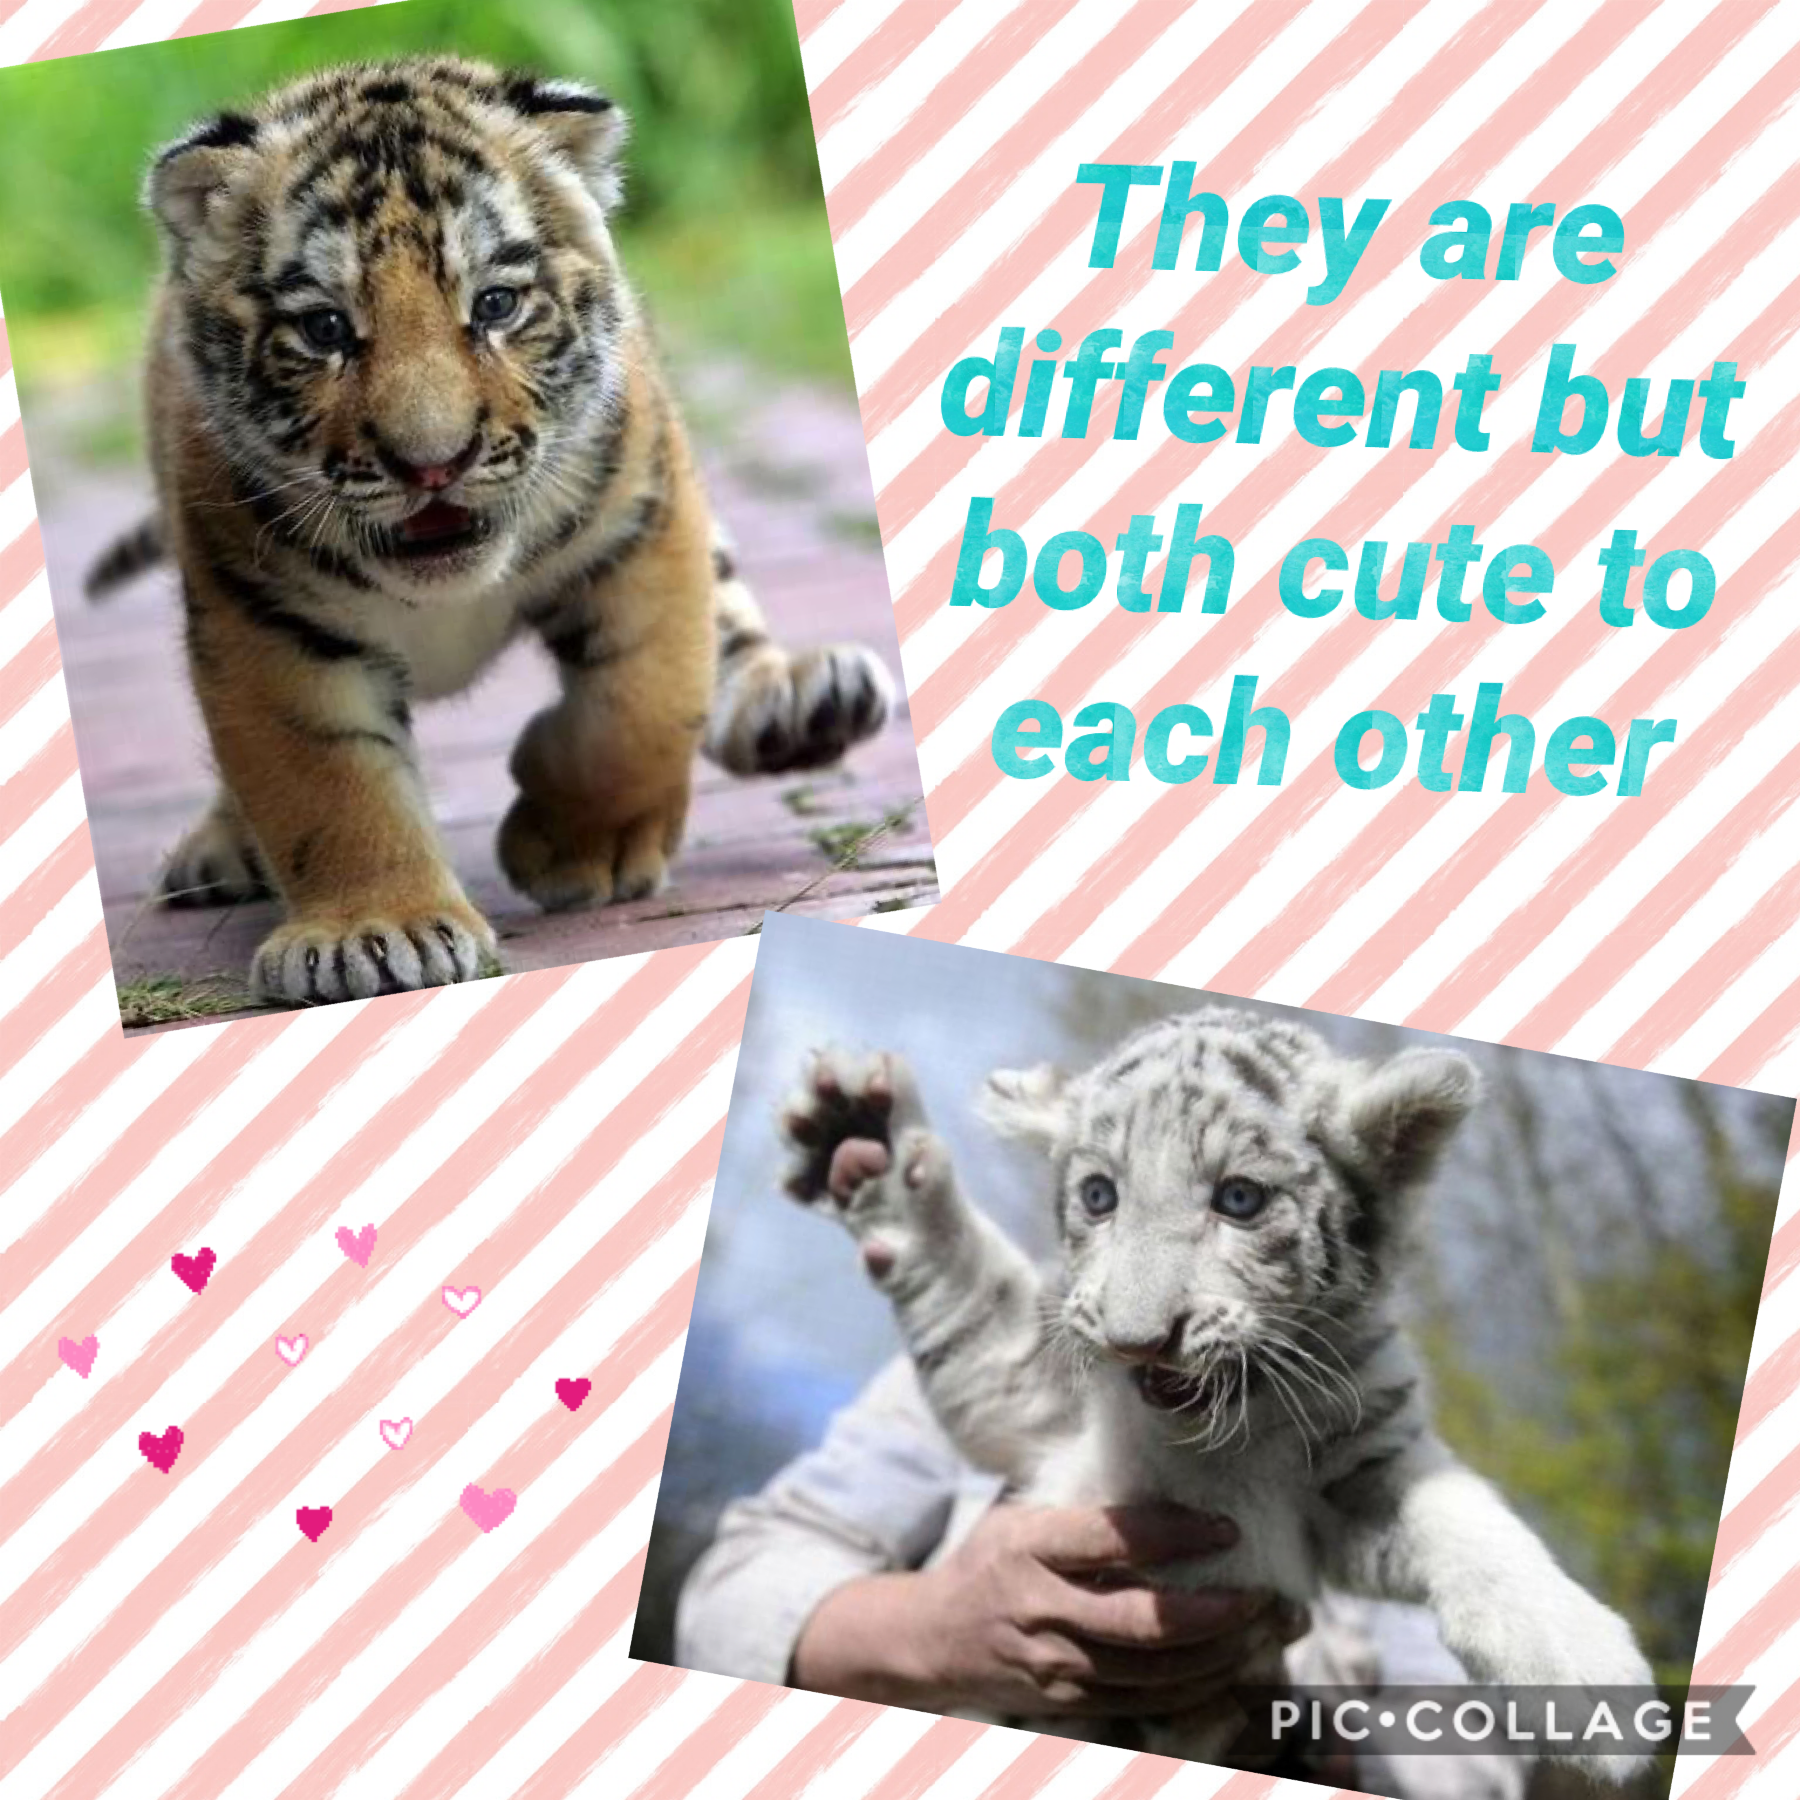 Two baby tiger too cute 